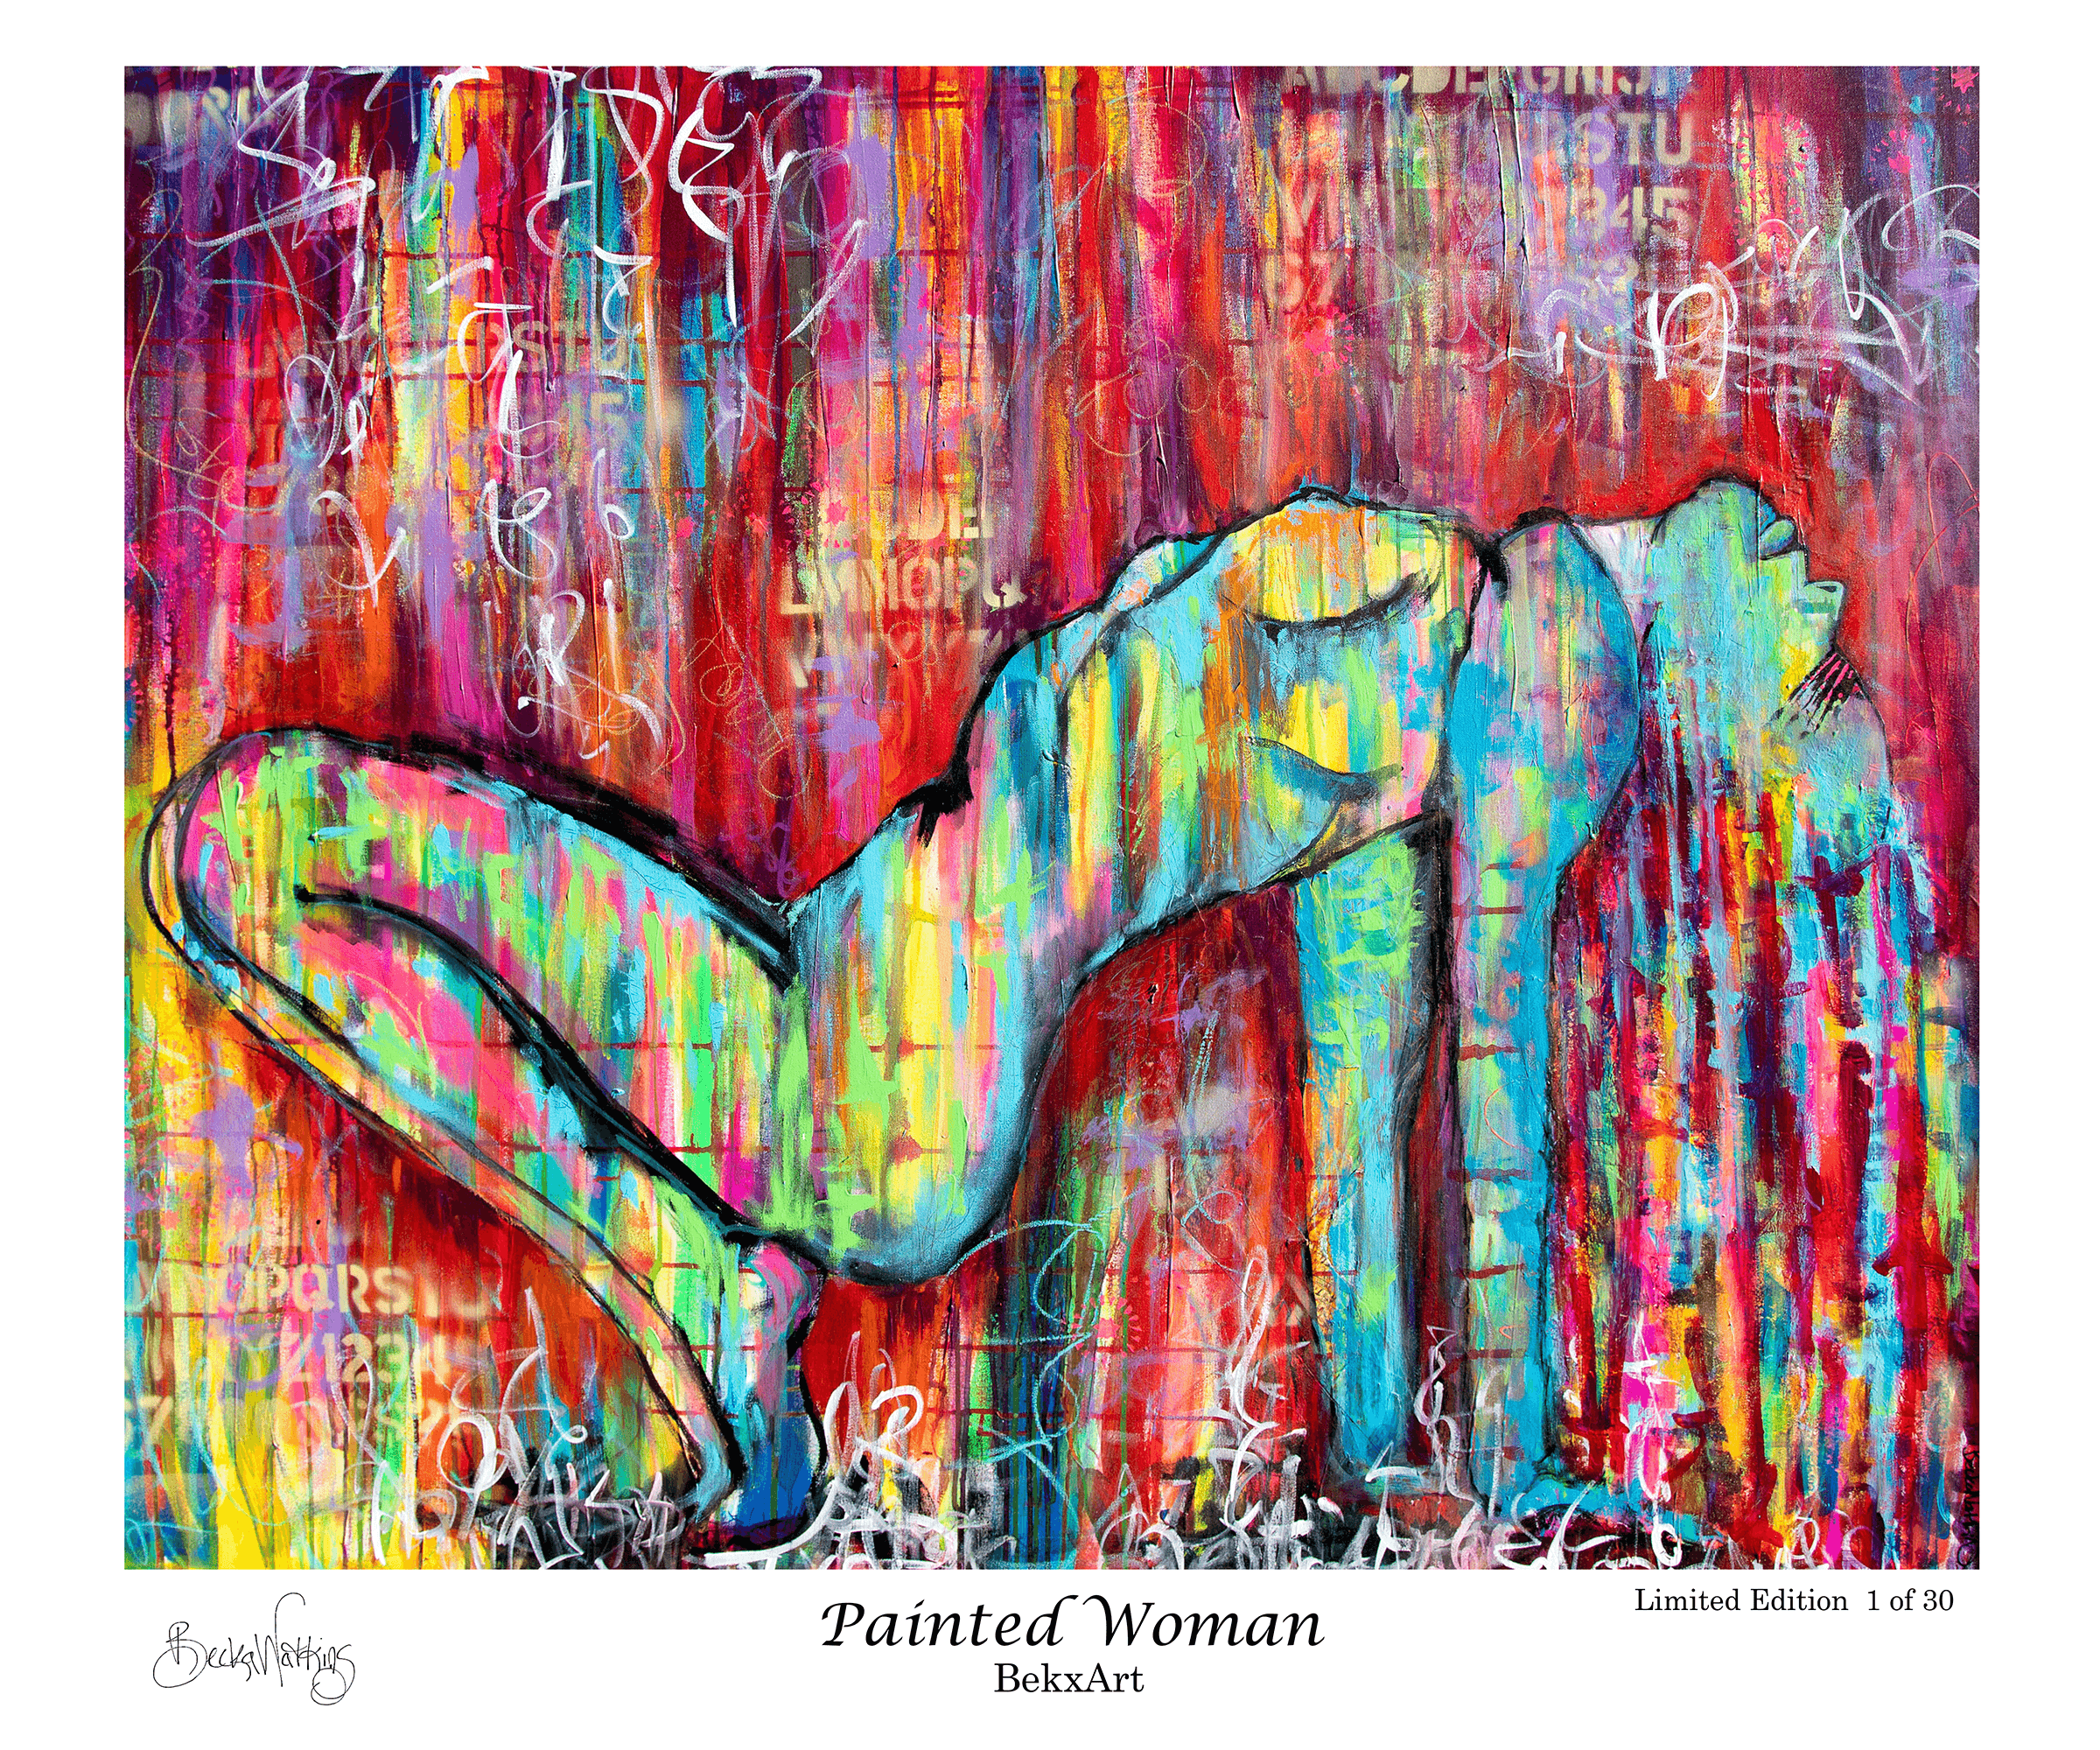 1/30, Limited Edition: “Painted Woman," BekxArt